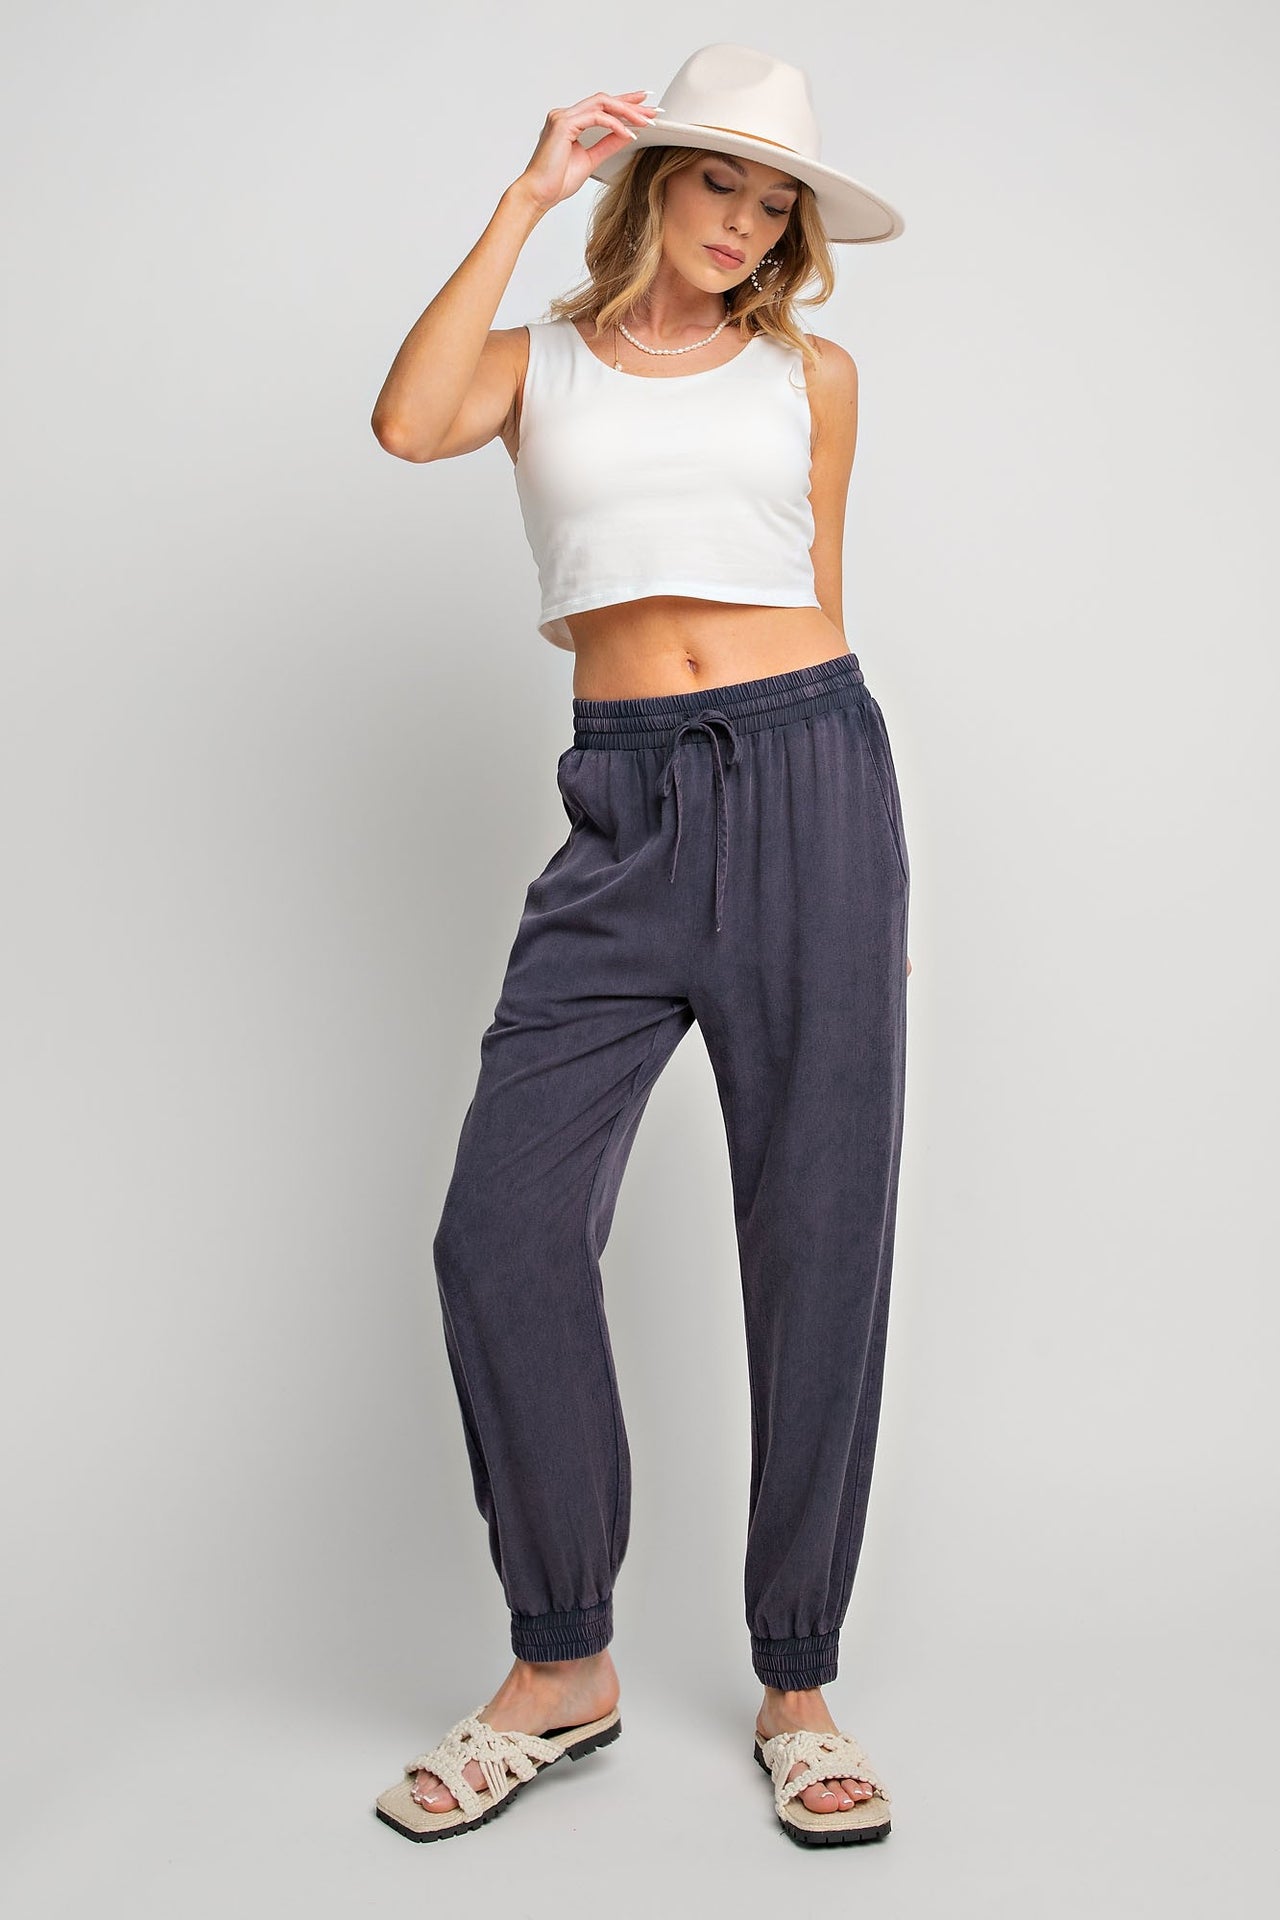 The Cora Joggers